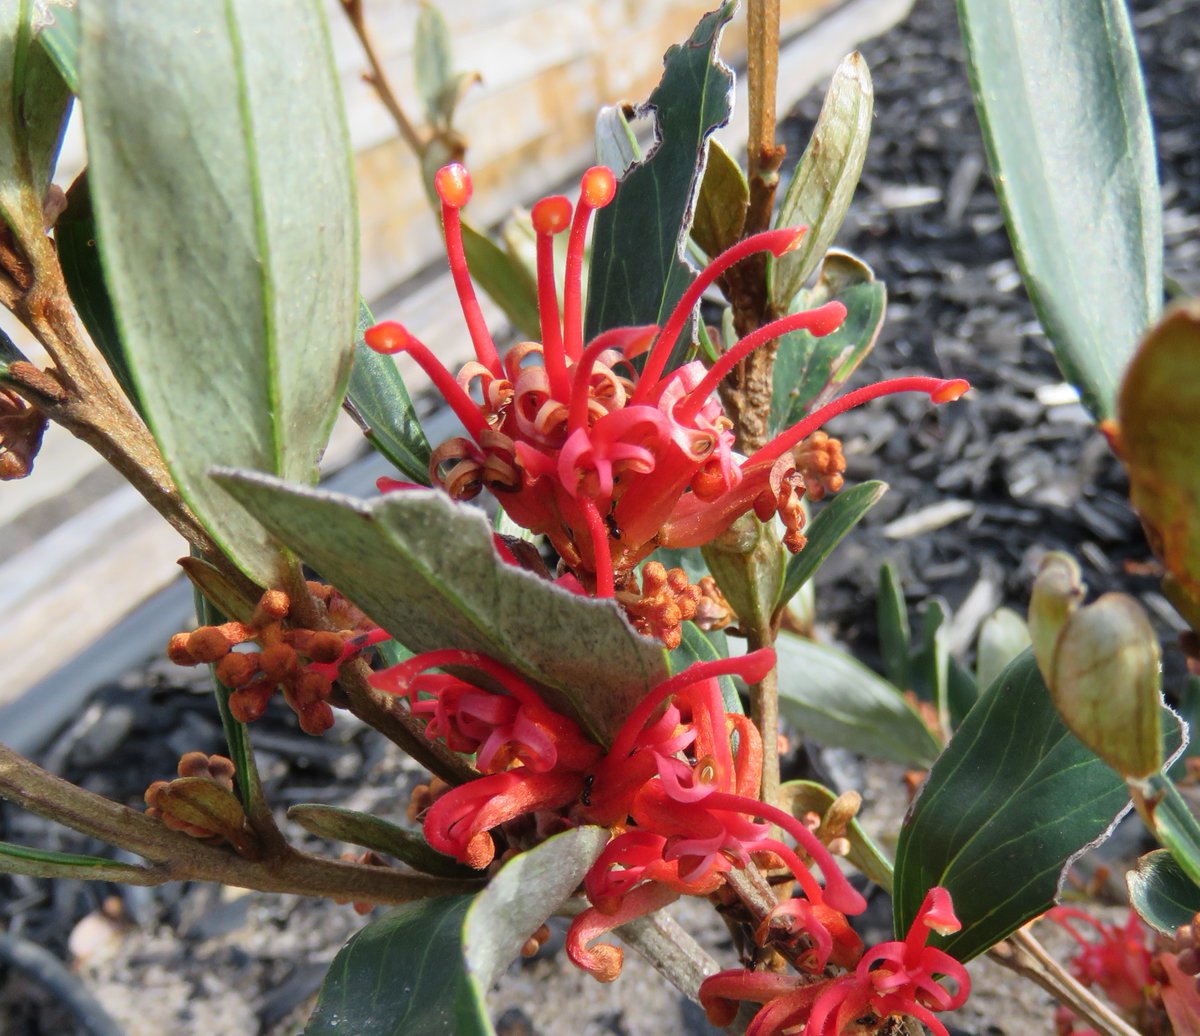 Flame Grevillea (Grevillea dimorpha) is an endangered species that is endemic to the Grampians in Victoria. It is being grown in the RBGV Cranbourne Gardens as part of the 'Raising Rarity' project that assesses the horticultural potential of rare species

#VicFlora #Grevillea